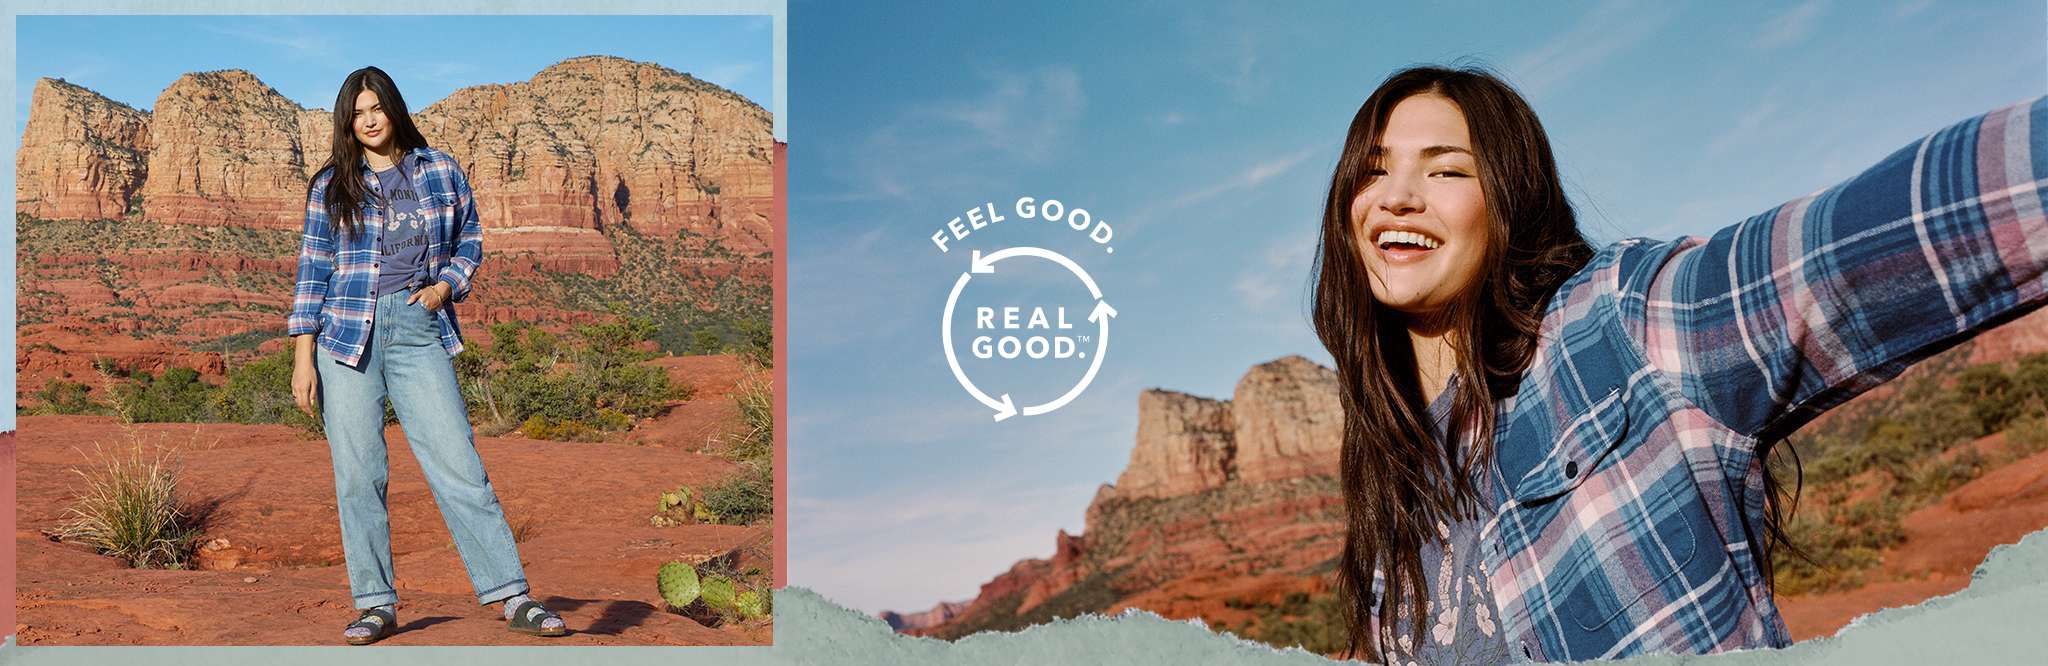 woman standing on red rock wearing real good jeans and flannel